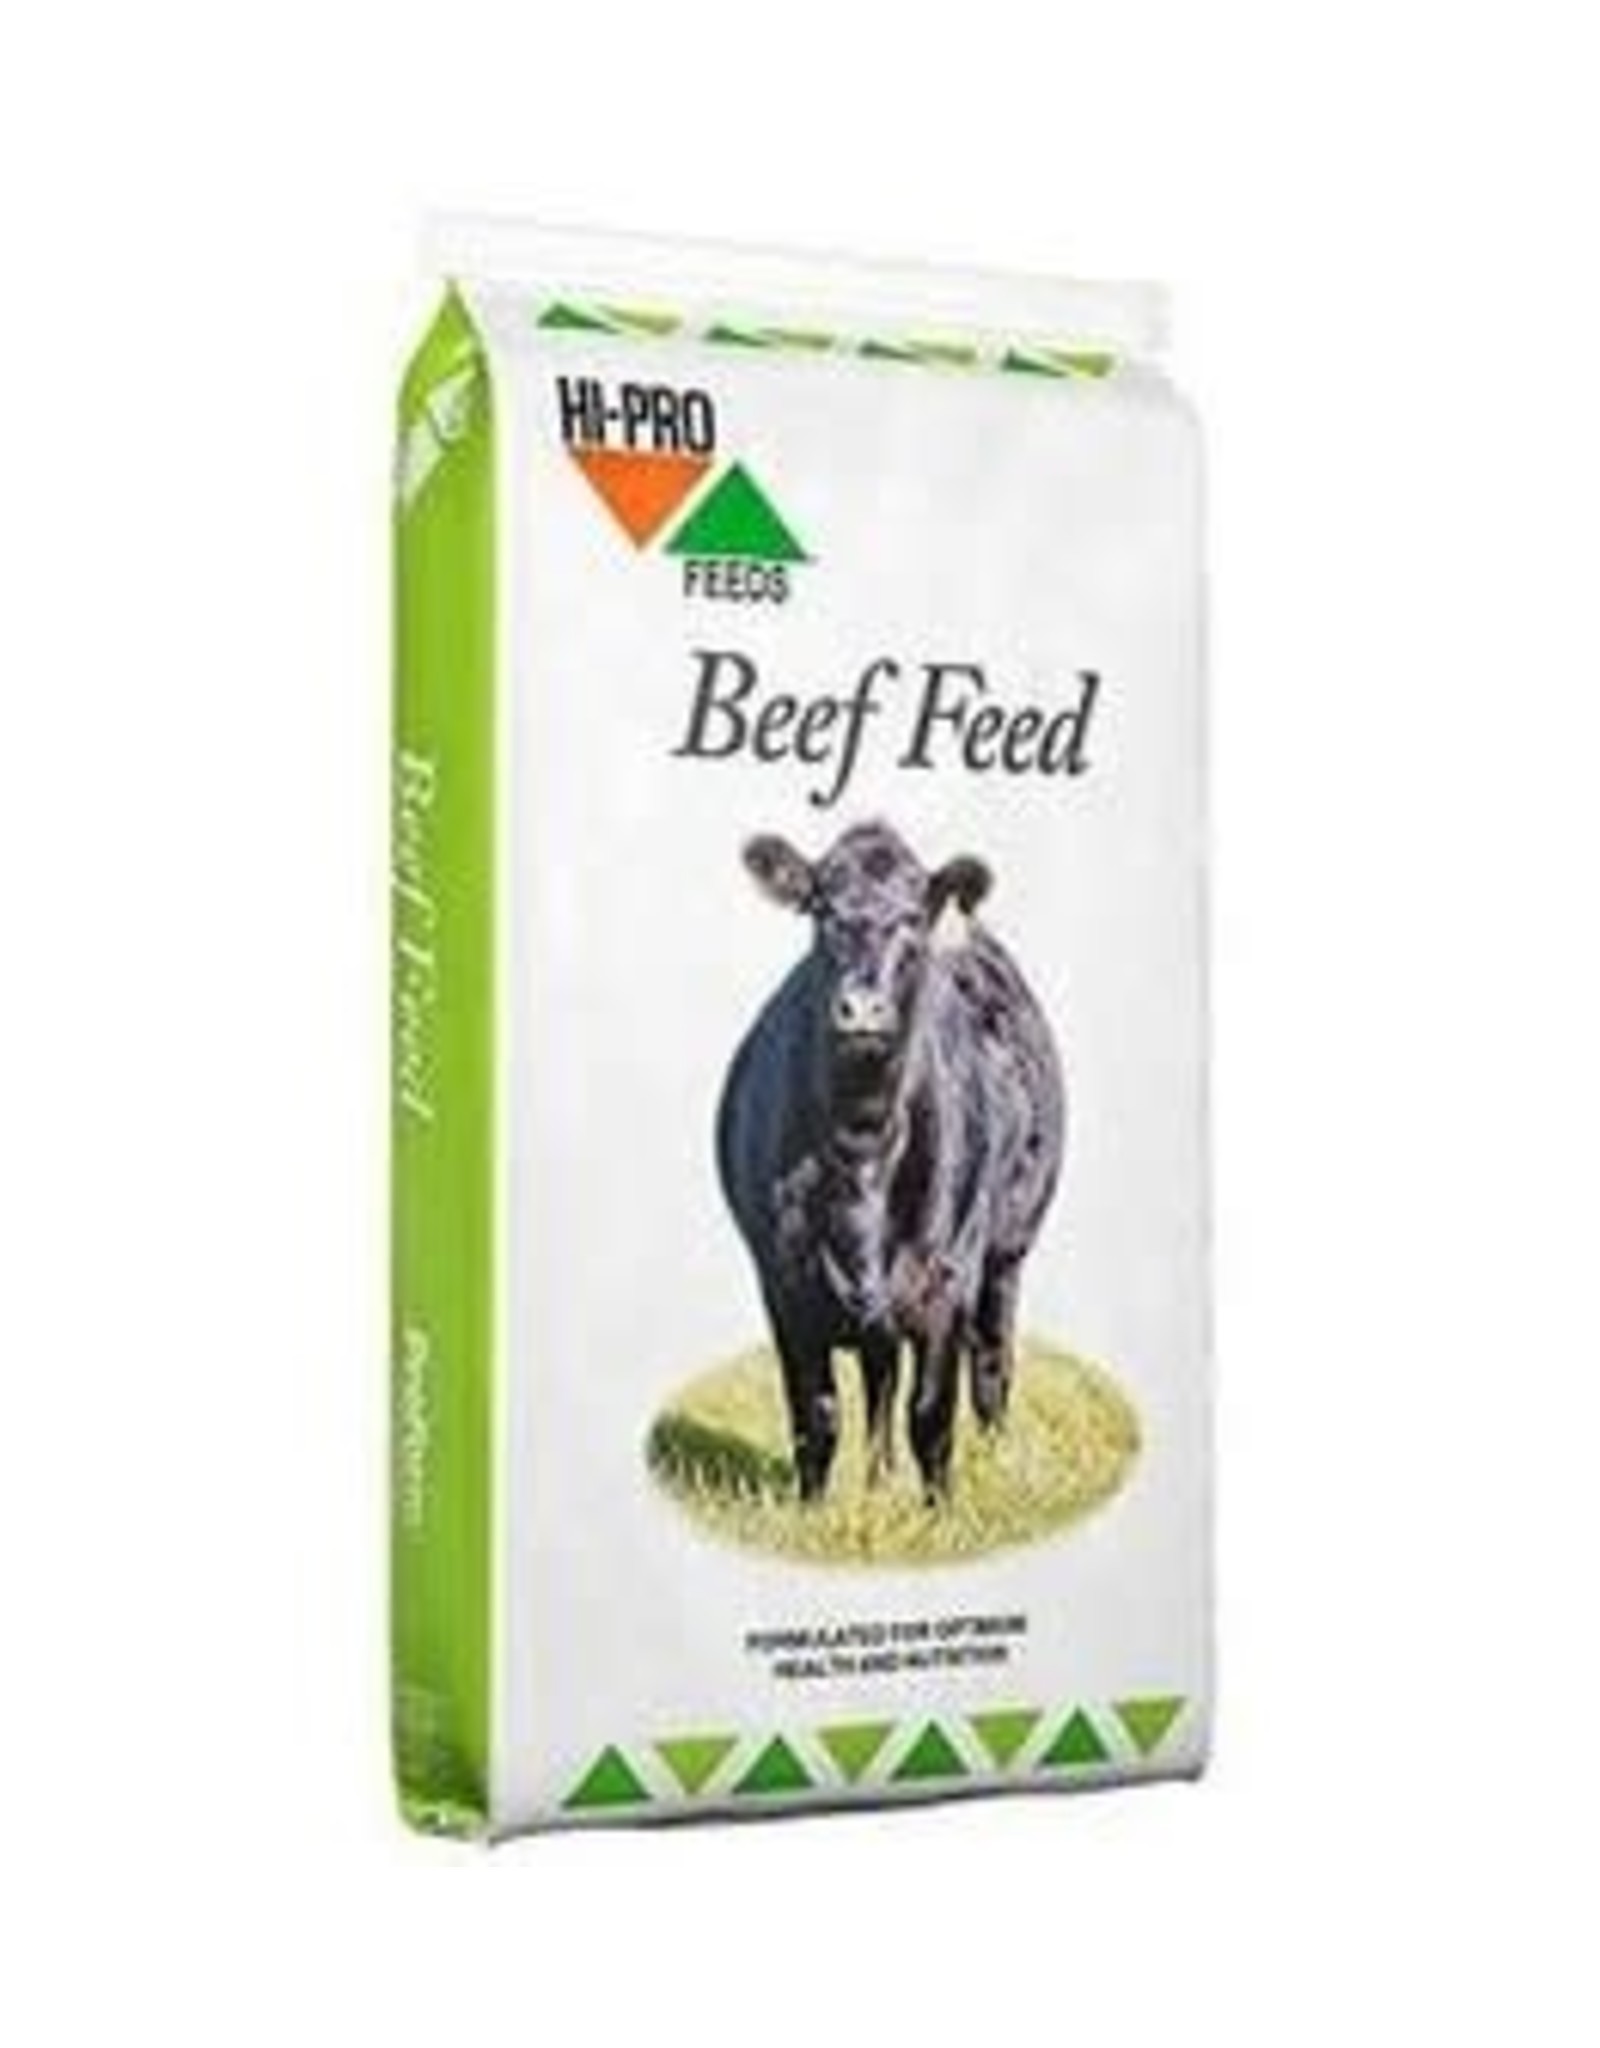 COMPLETE FEED - GAME CHANGER (PRO FORM) BEEF CALF STARTER 20 KG- NON MEDICATED  - 13332885